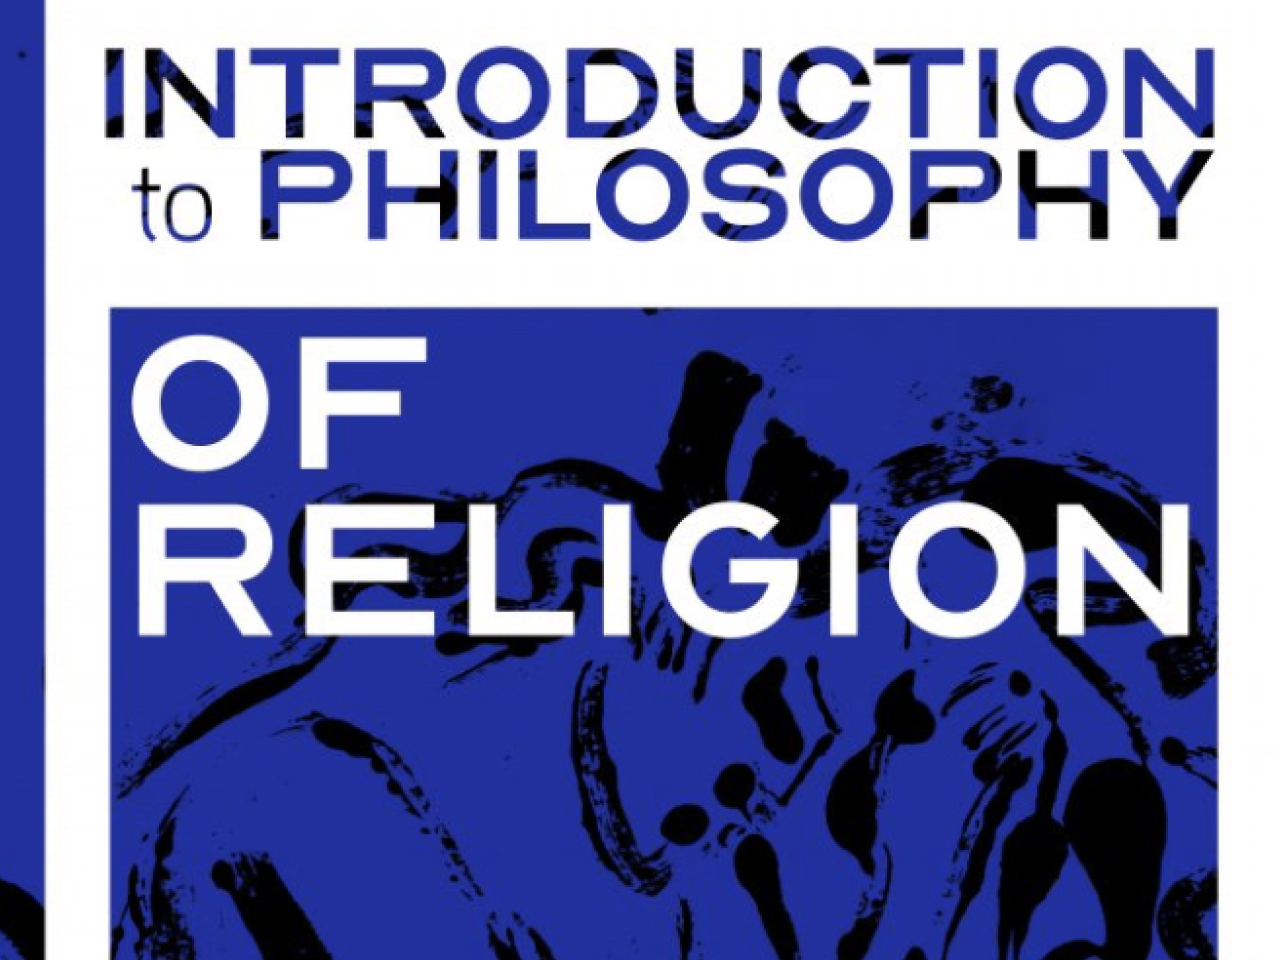 Introduction to philosophy : philosophy of religion